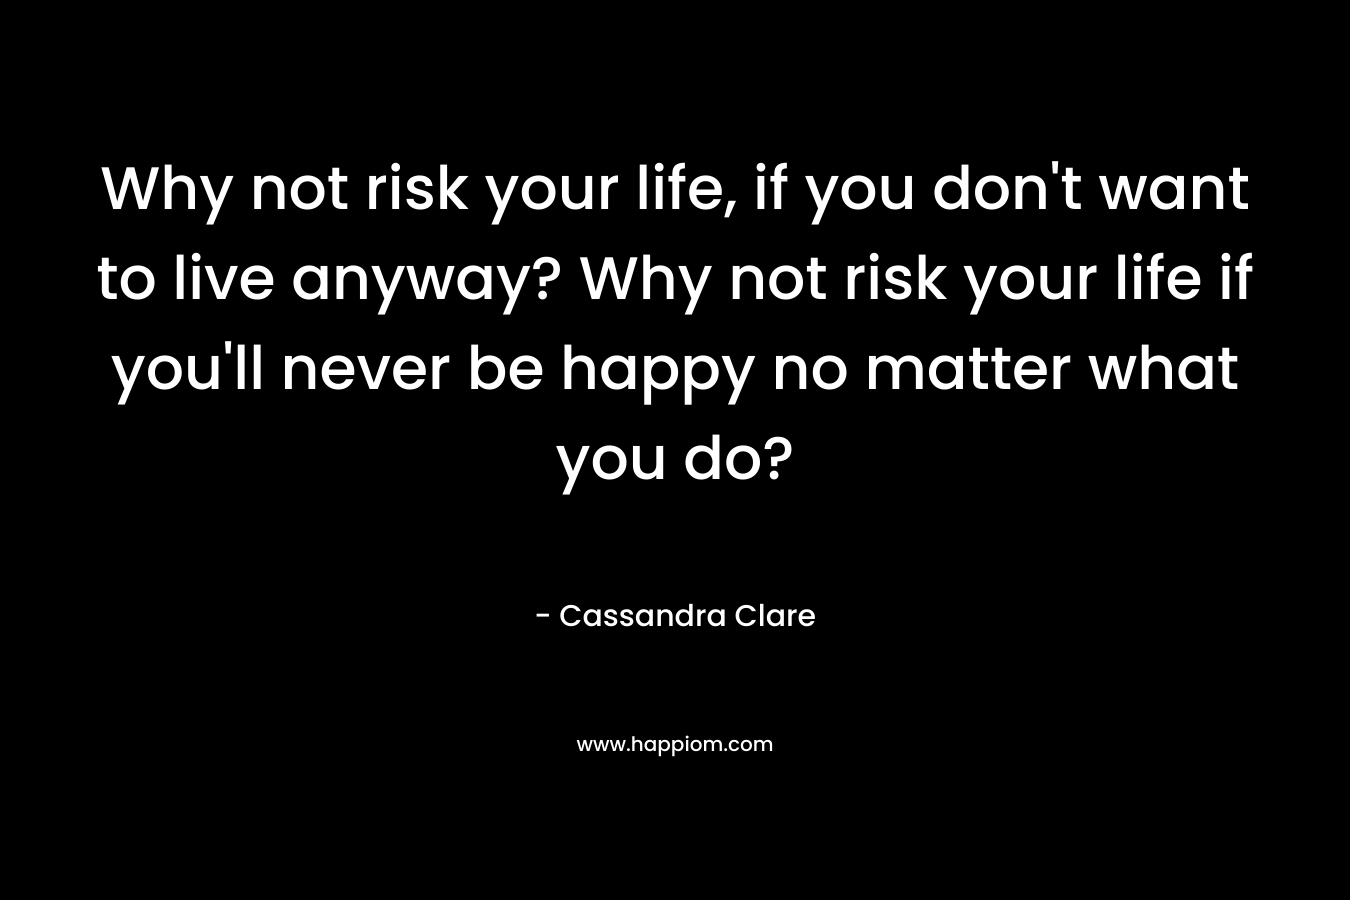 Why not risk your life, if you don't want to live anyway? Why not risk your life if you'll never be happy no matter what you do?